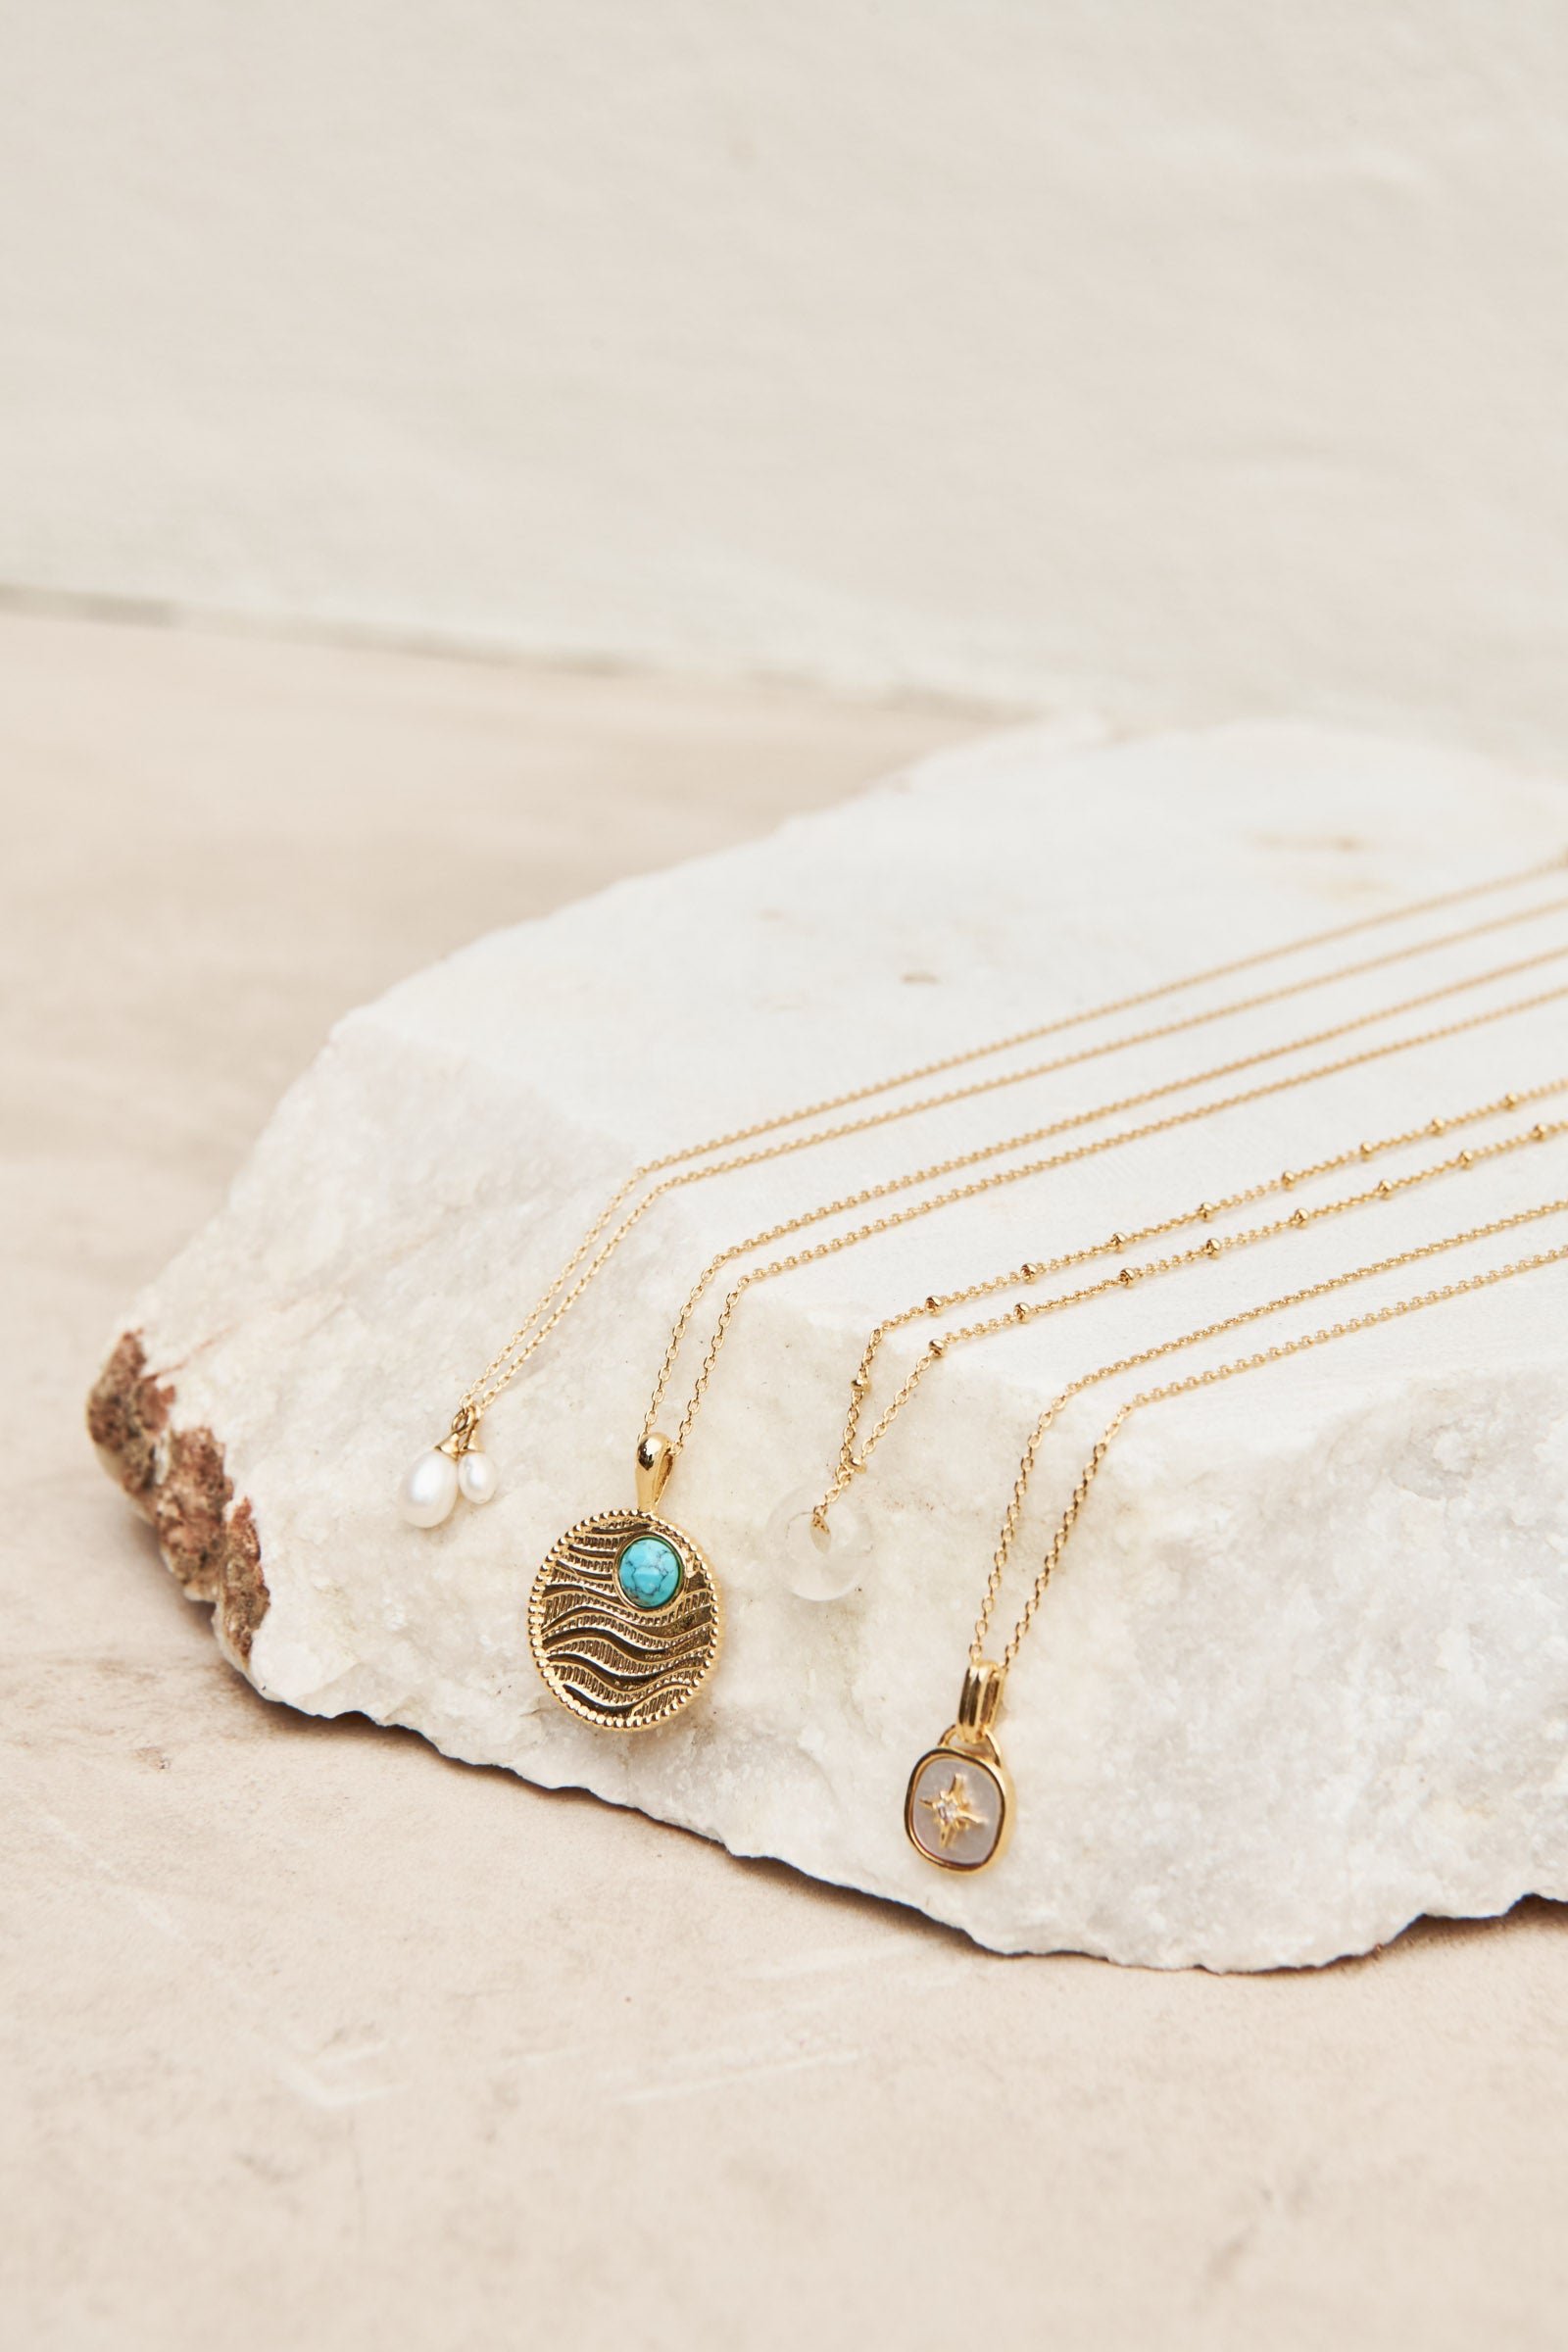 Legacy Necklace - The Pearler - eb&ive Necklace